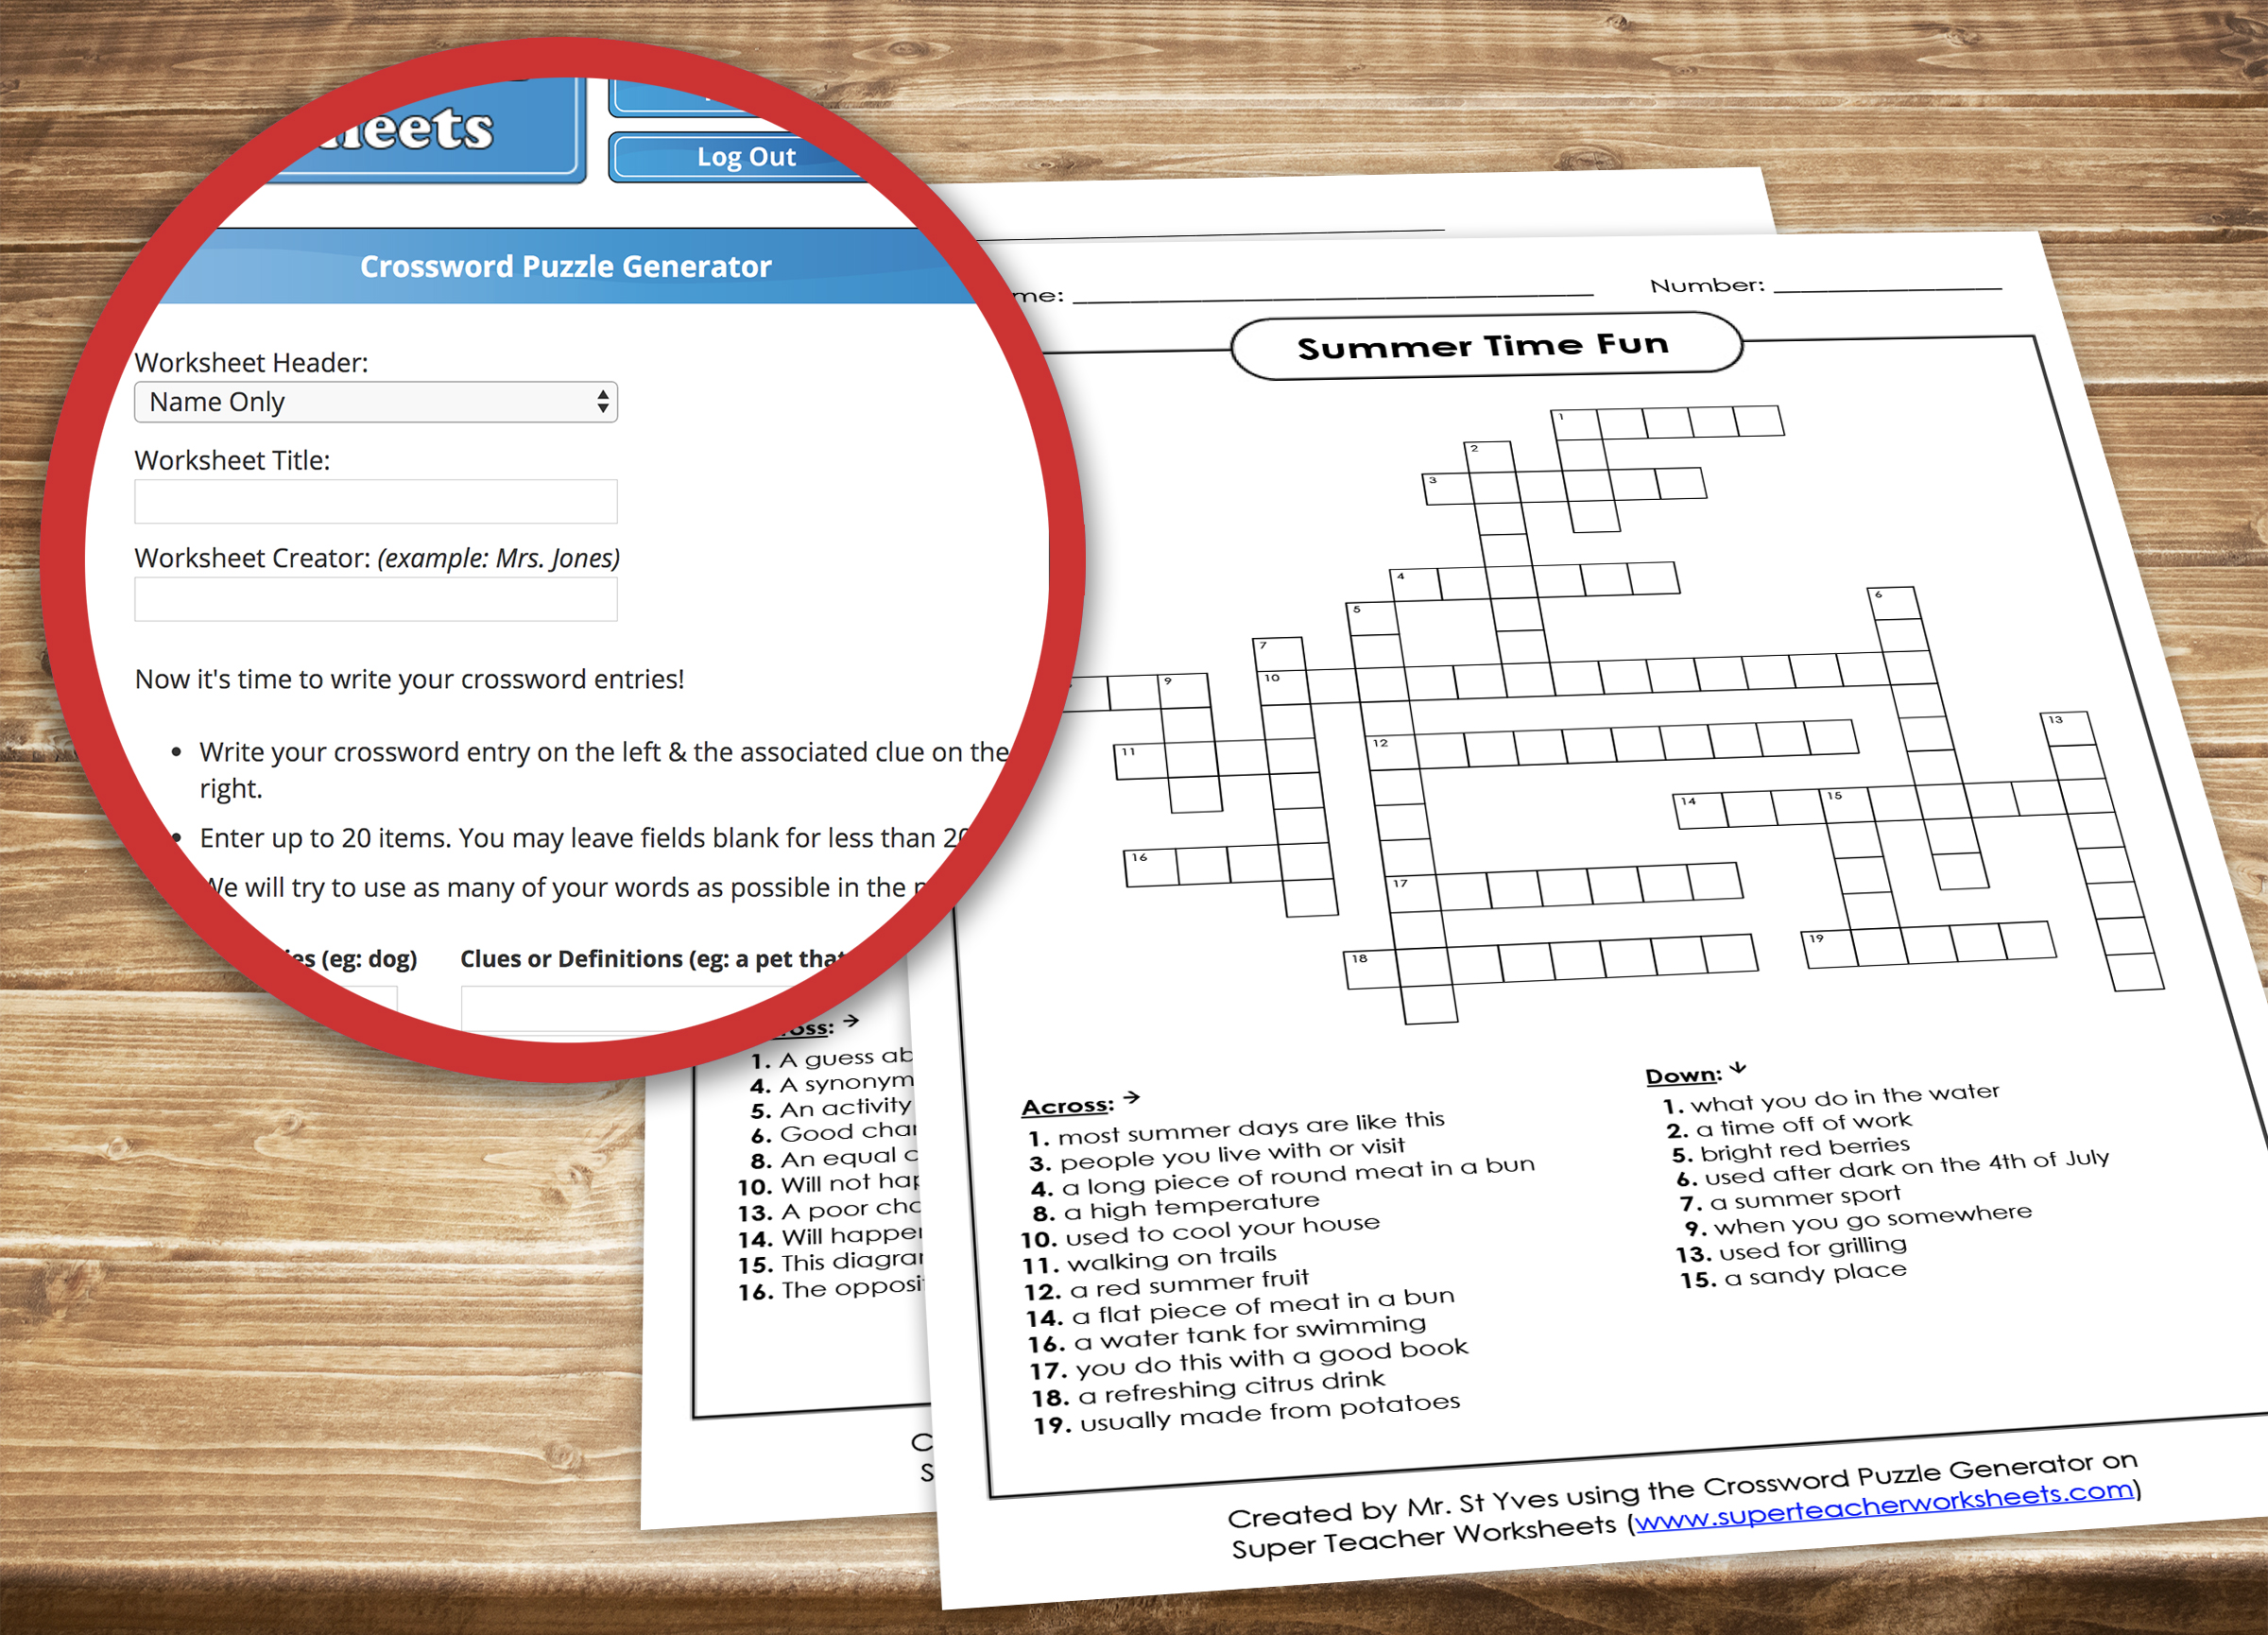 Make Your Own Crossword Puzzle!